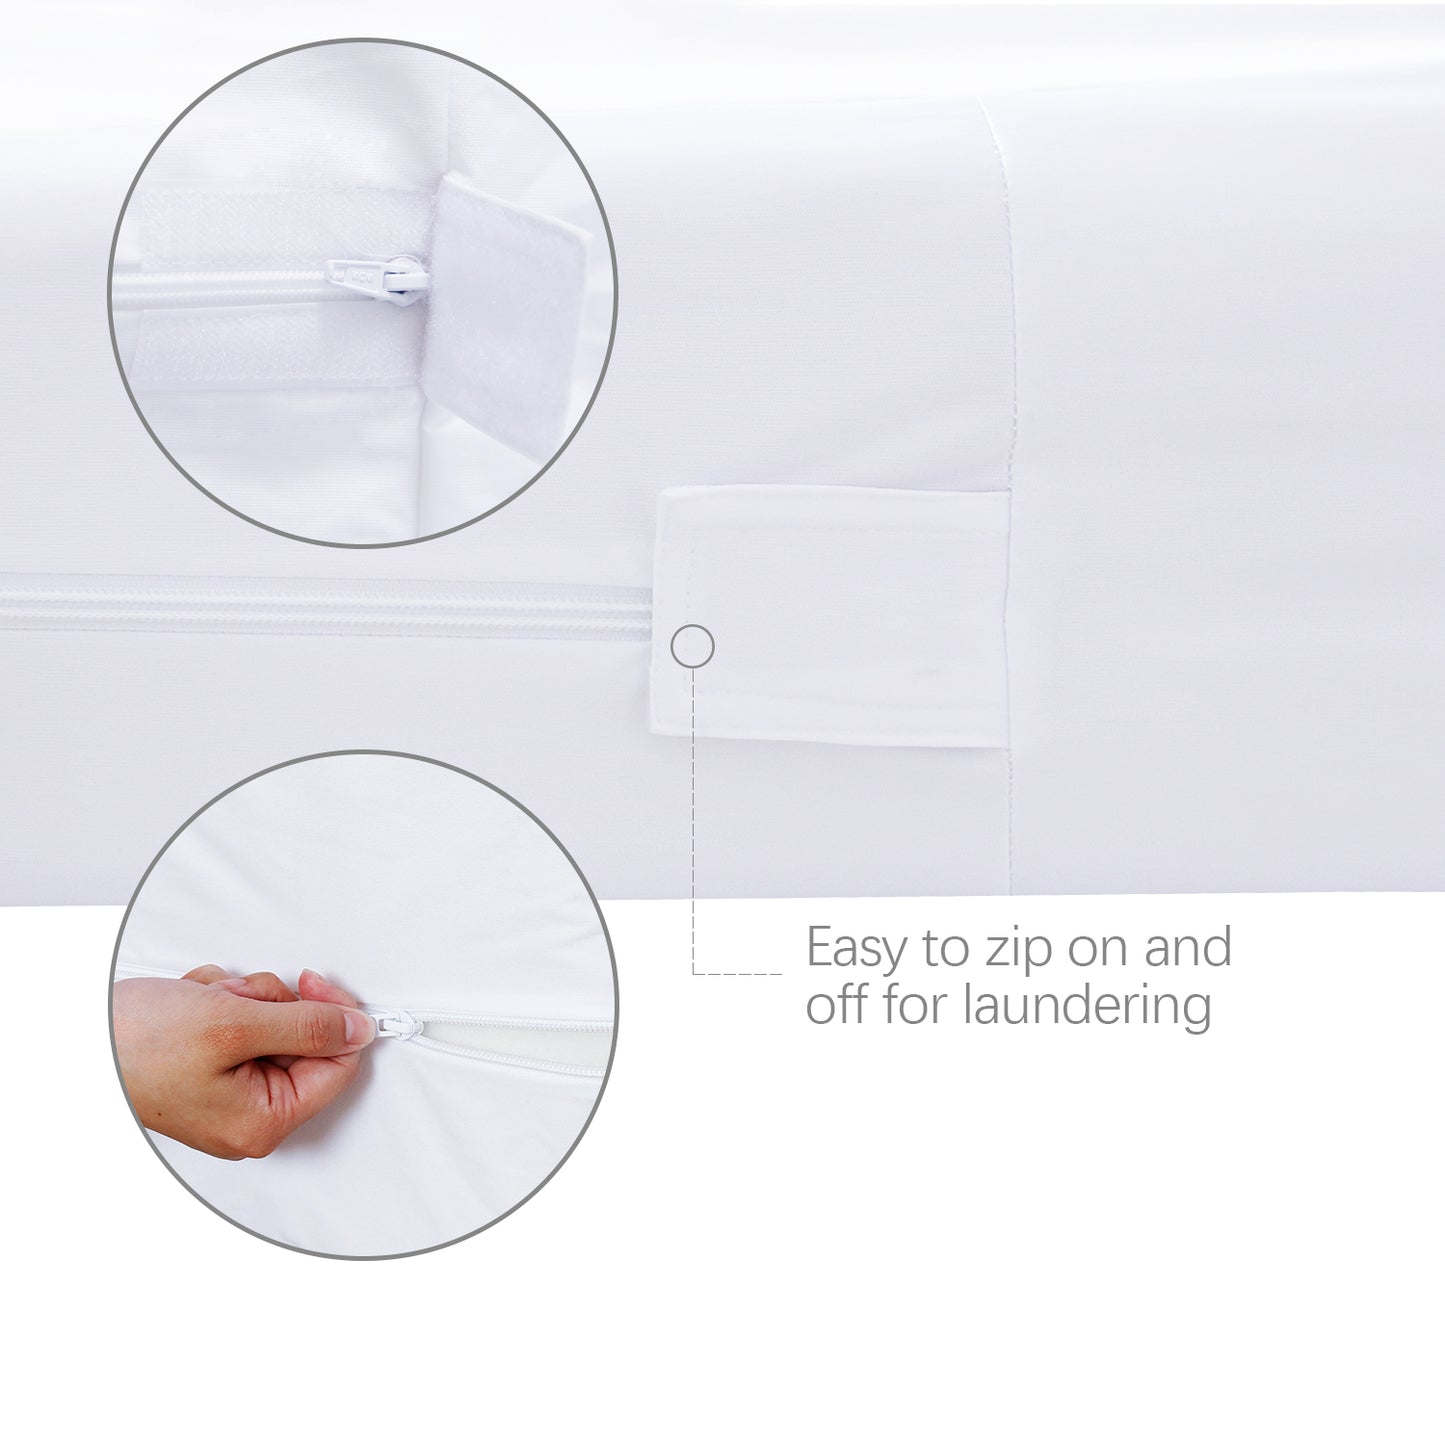 Low Profile Box Spring Encasement , Dustproof and Waterproof 6 Sides Wrapping Zippered Mattress Protector Cover, Fits 4-5 Inches Depth - Biloban Online Store